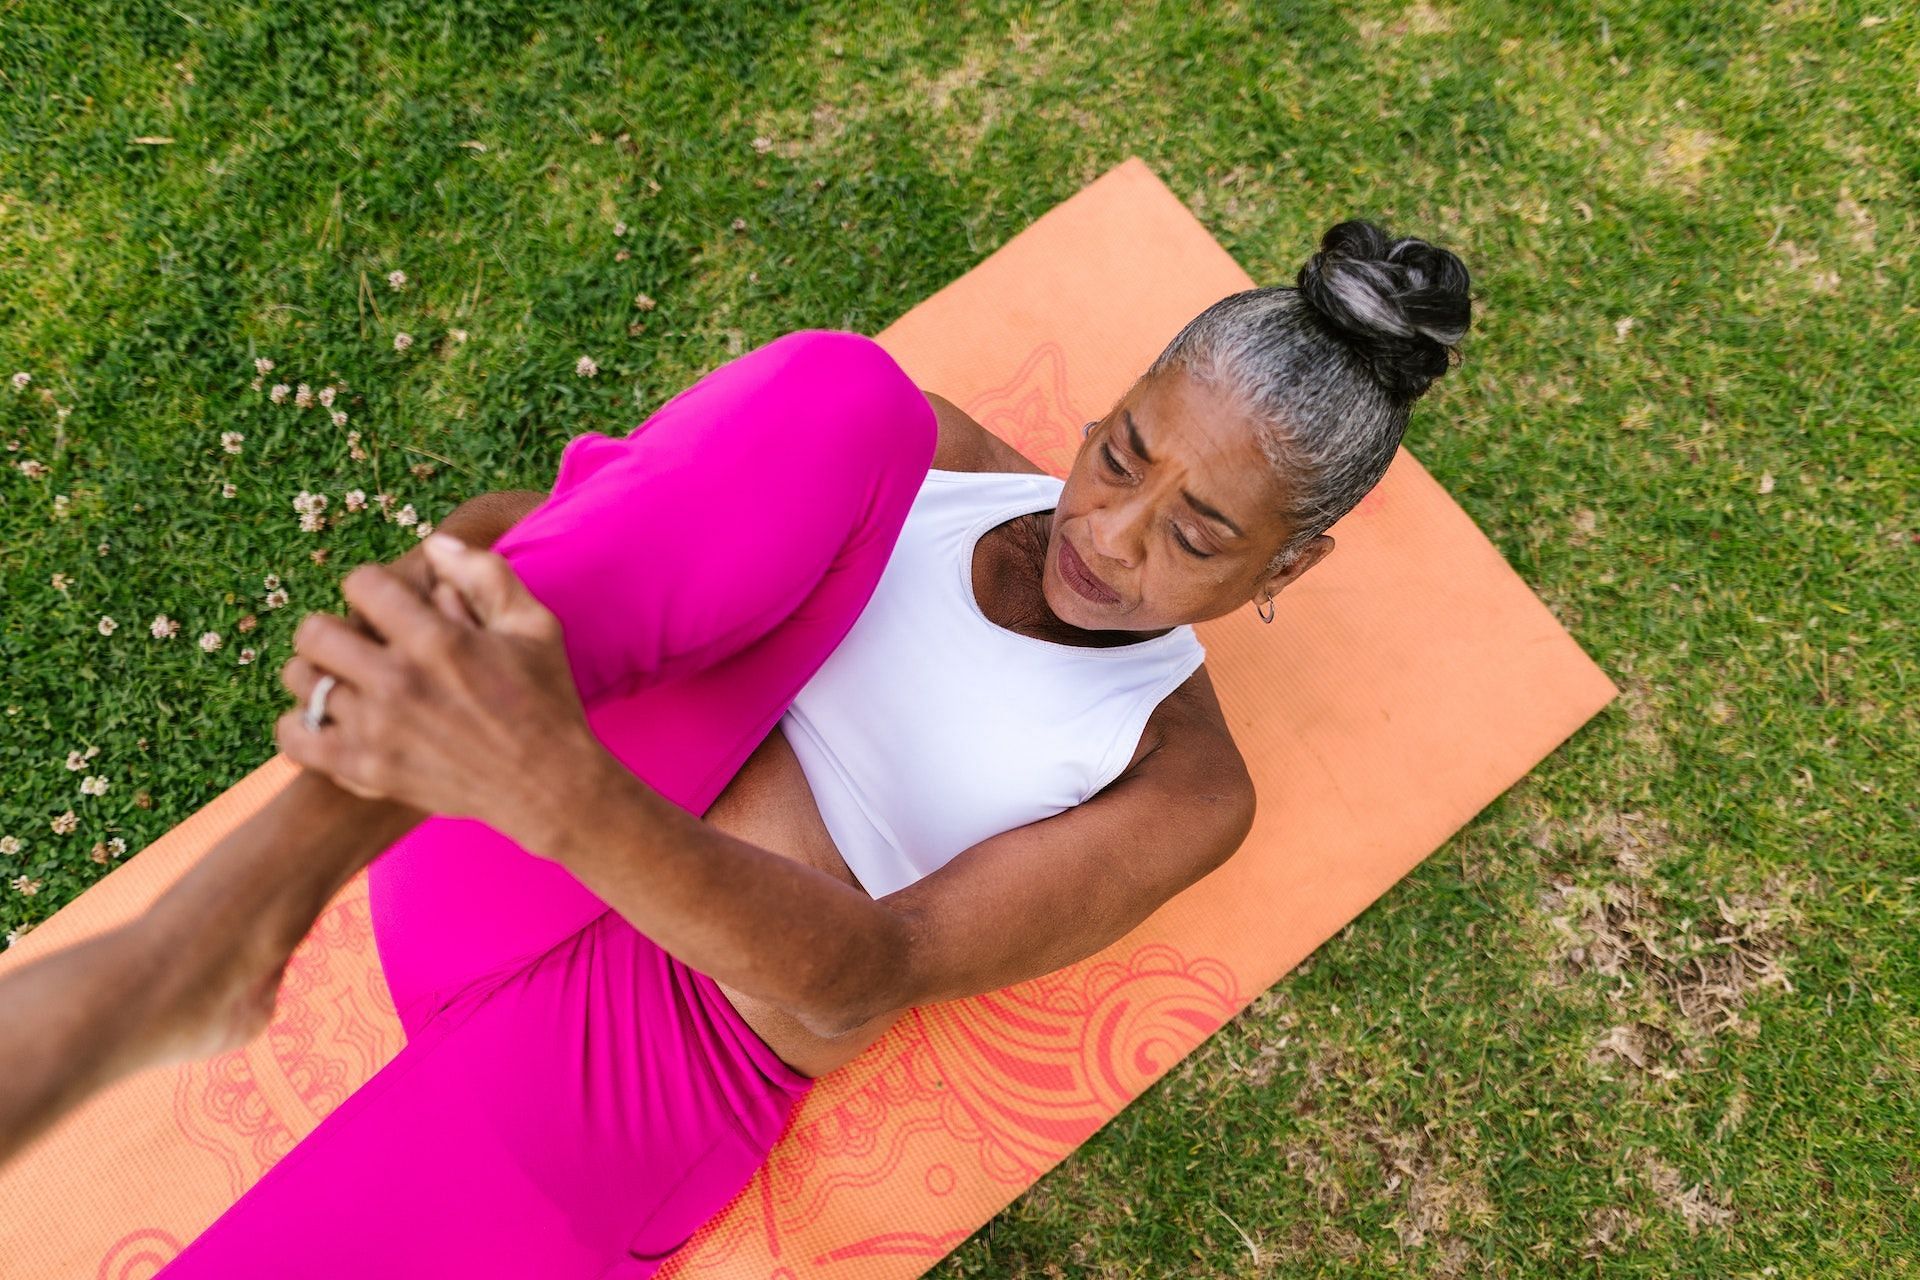 Knee-to-chest is good for the lower back muscles. (Photo via Pexels/Photo by RODNAE Productions)